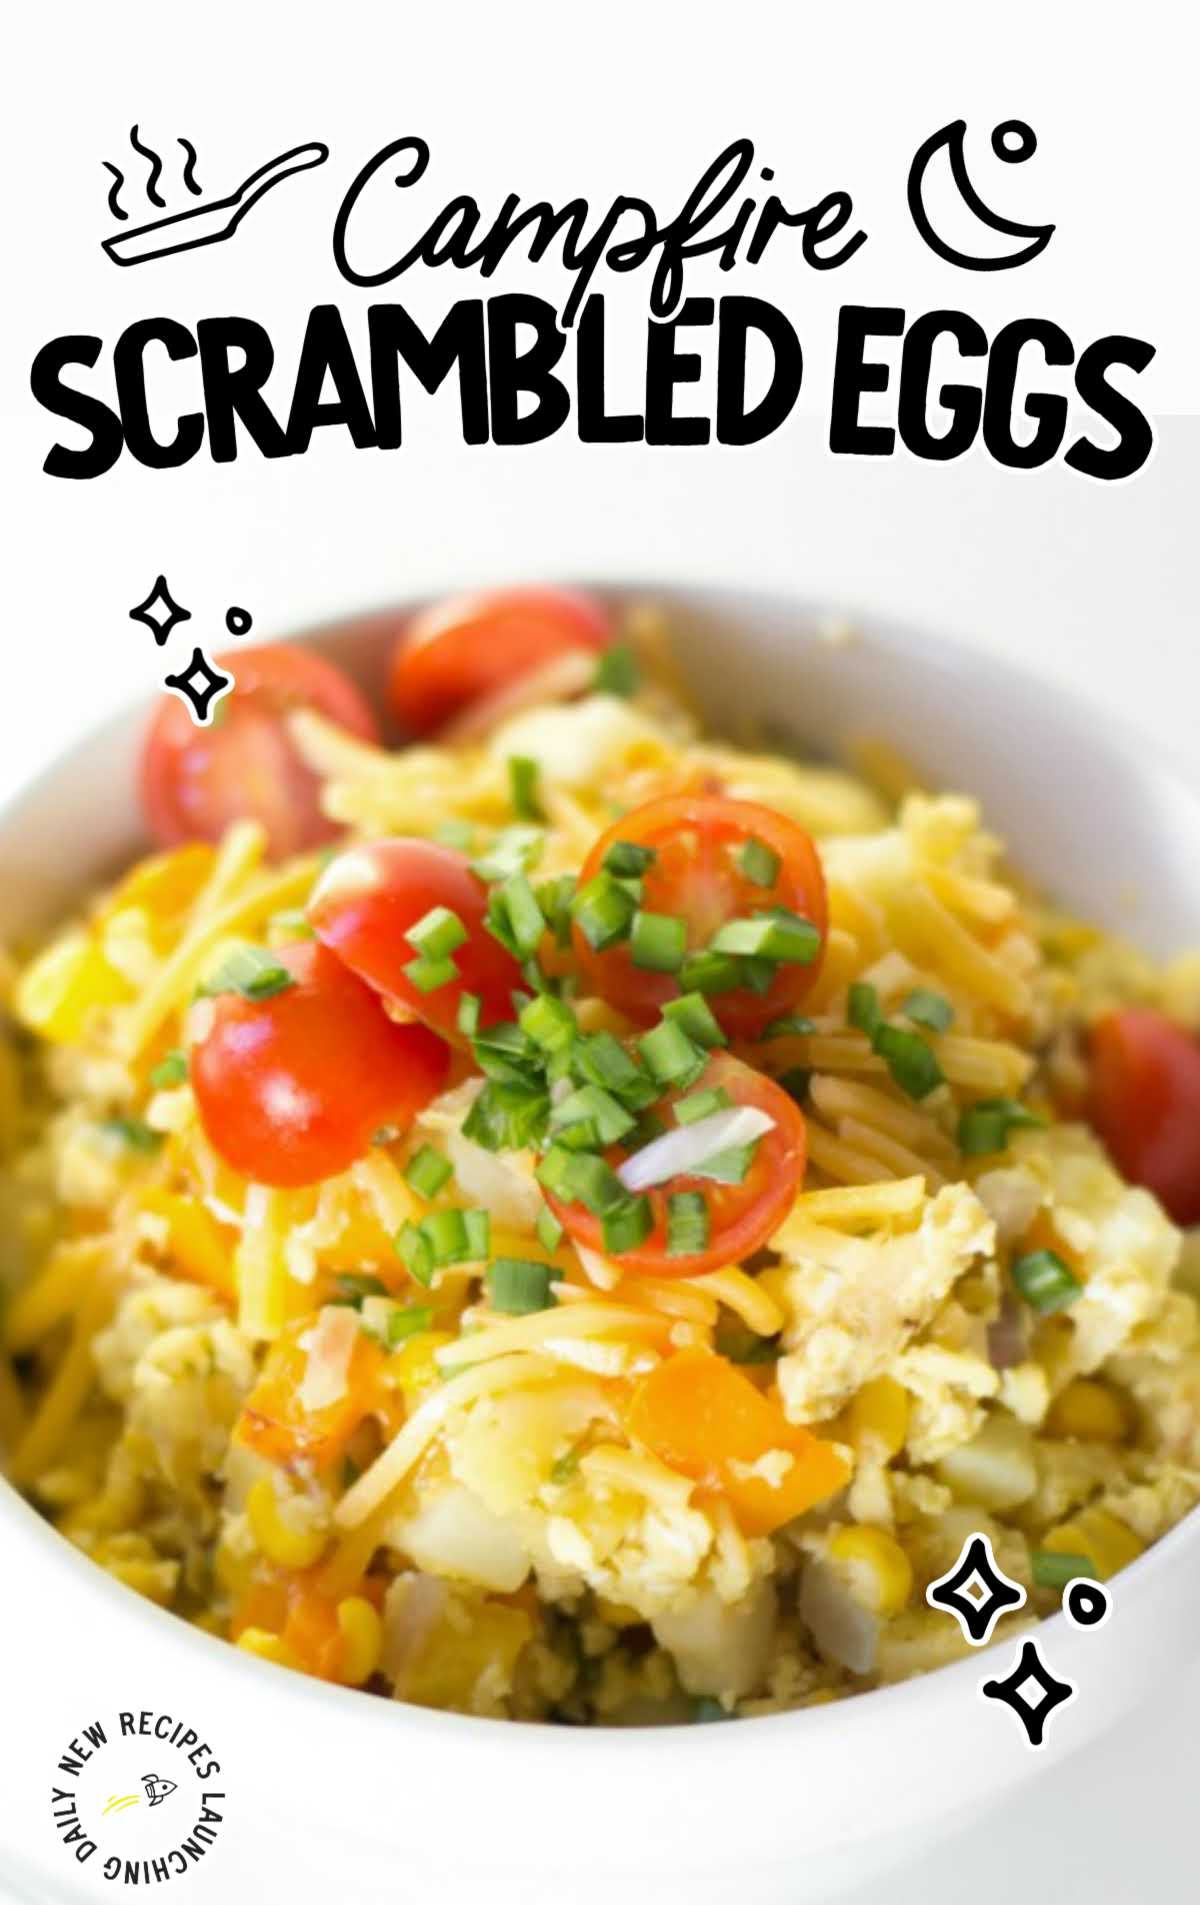 Campfire Scrambled Eggs topped with herbs